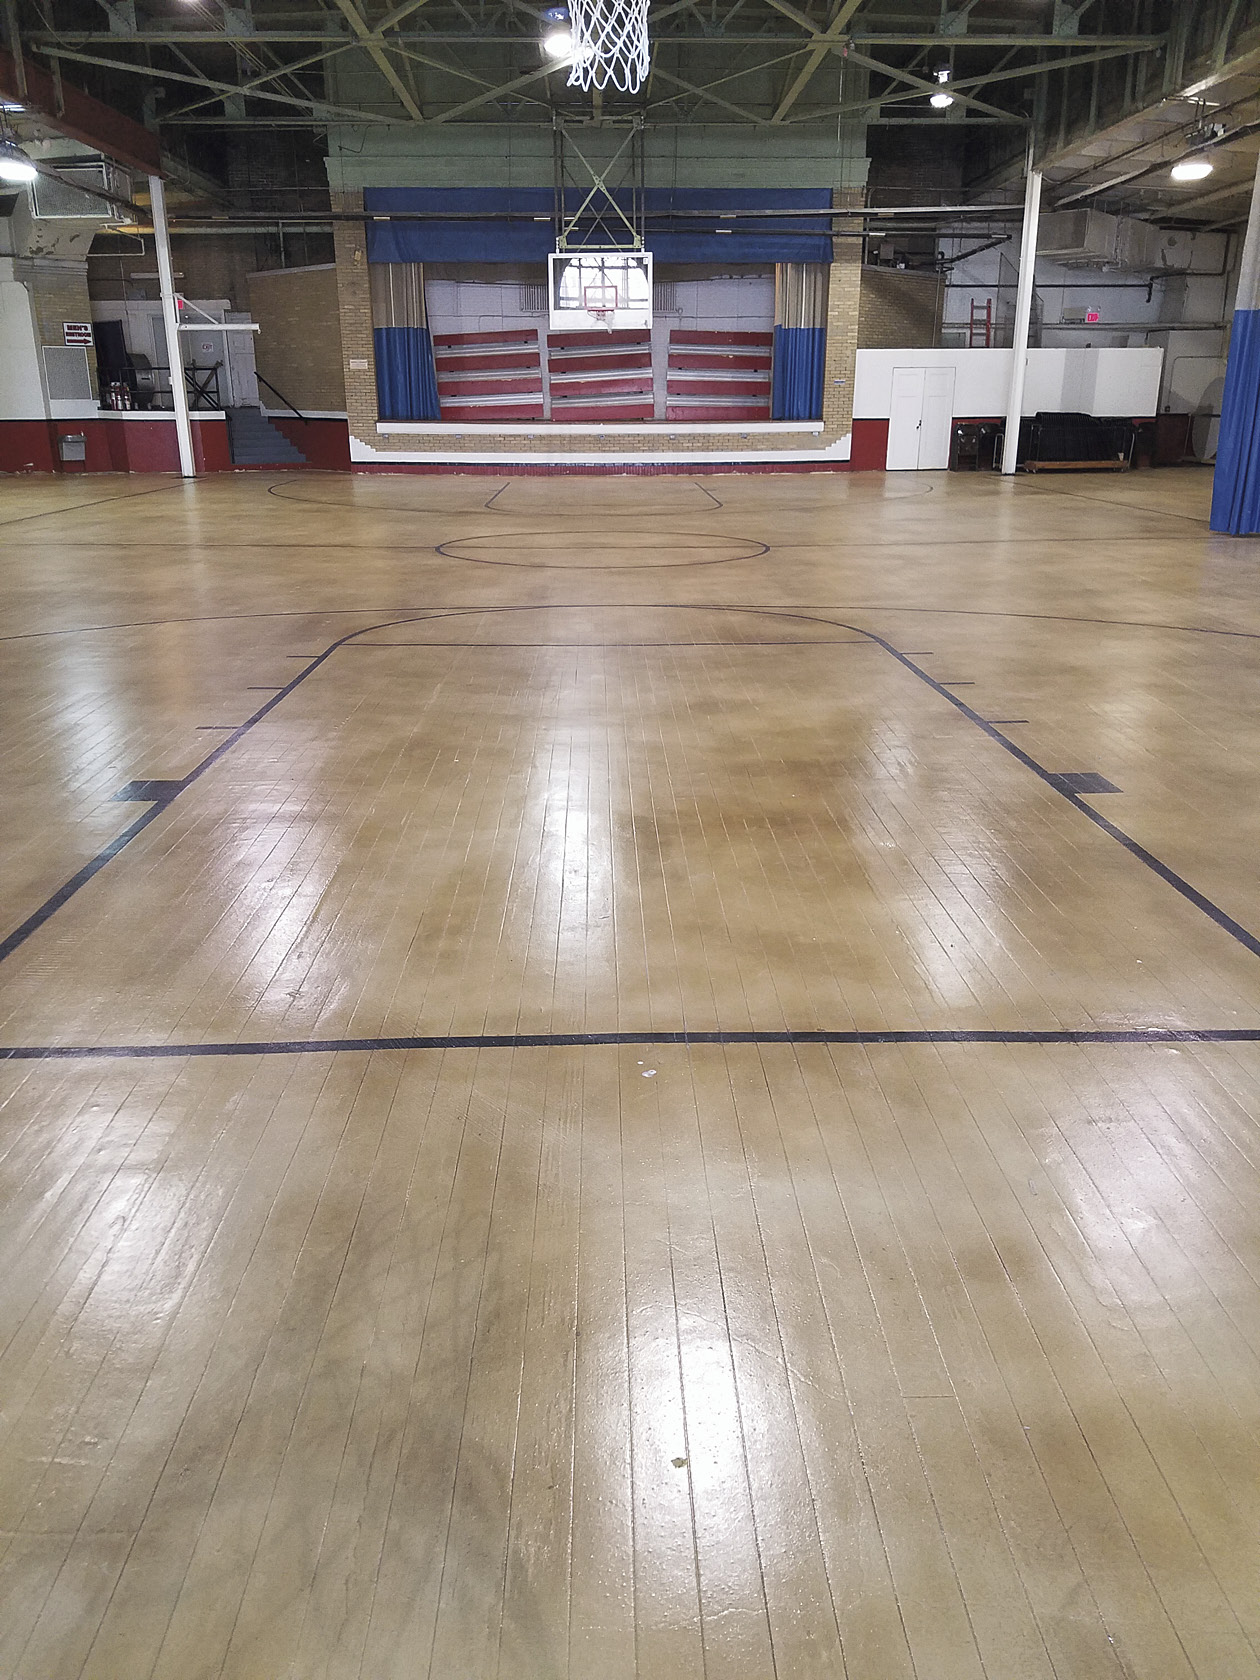 So it was quite a swoosh in his hoop when Bell landed the contract to resurface the 10,000-square-foot floor of the old gym, which had been acquired by the town from the YMCA and was now the Henry Township Community Center.